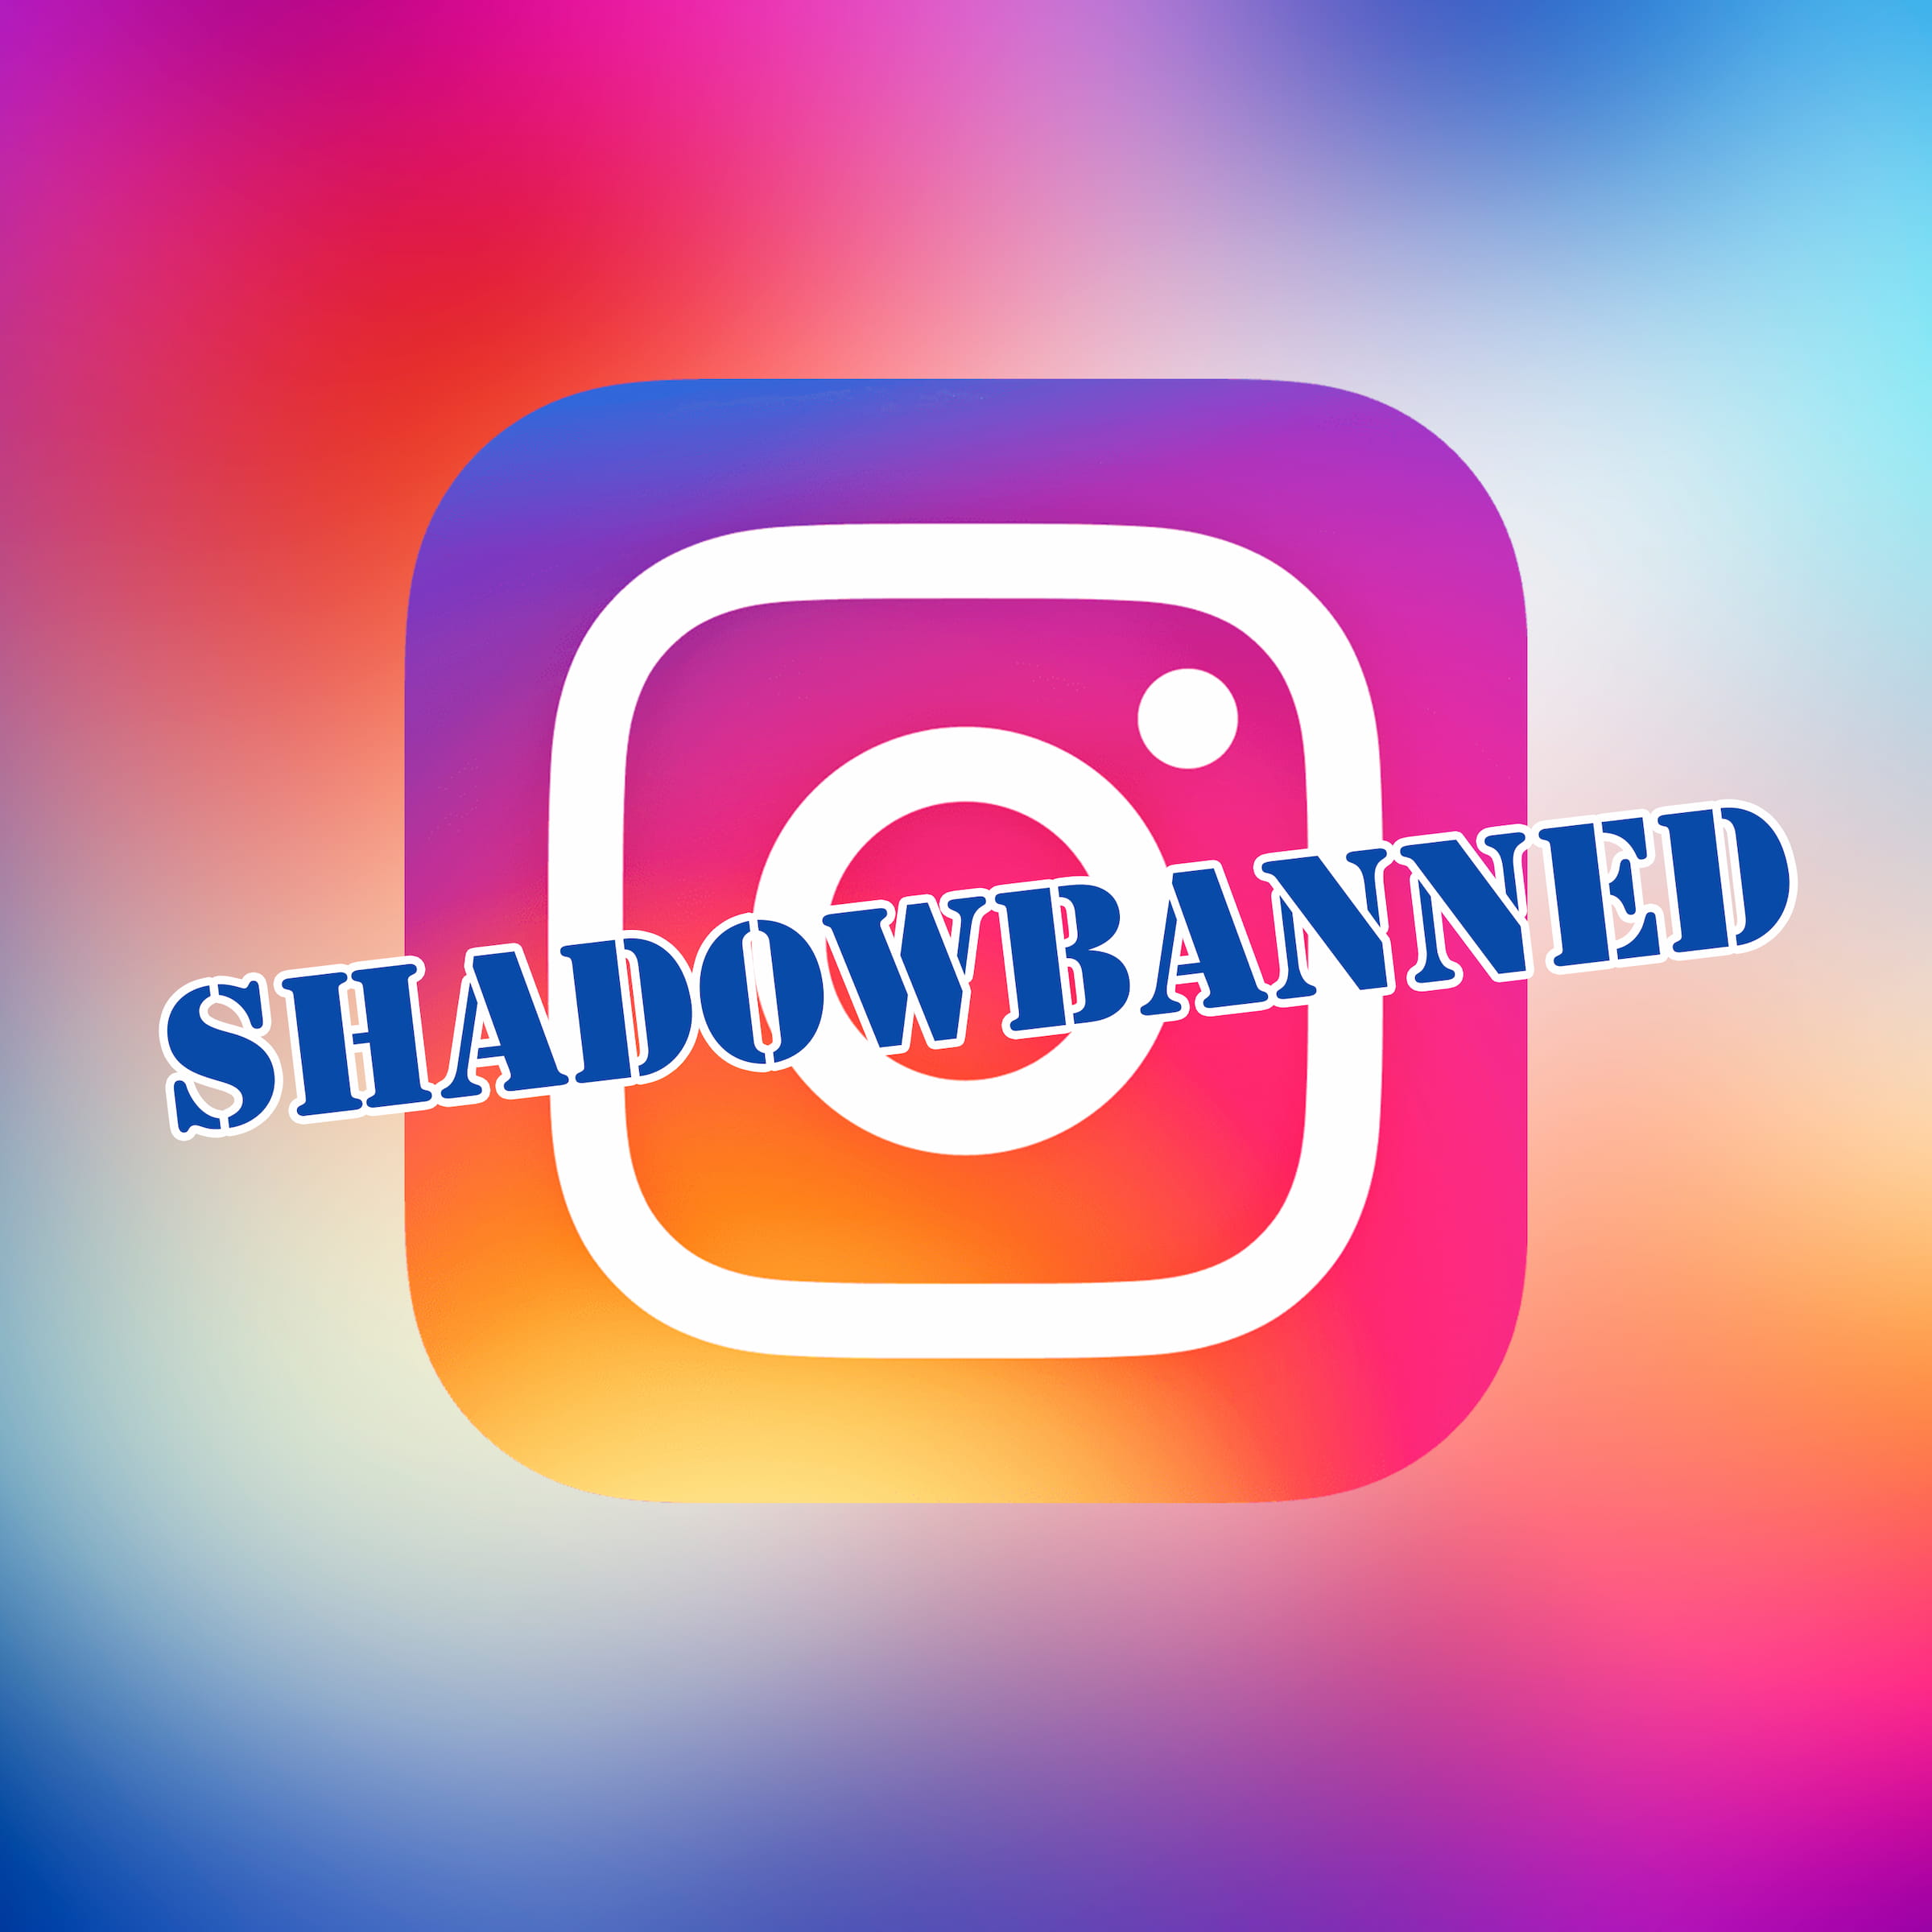 Instagram Banned Hashtags to Avoid in 2022